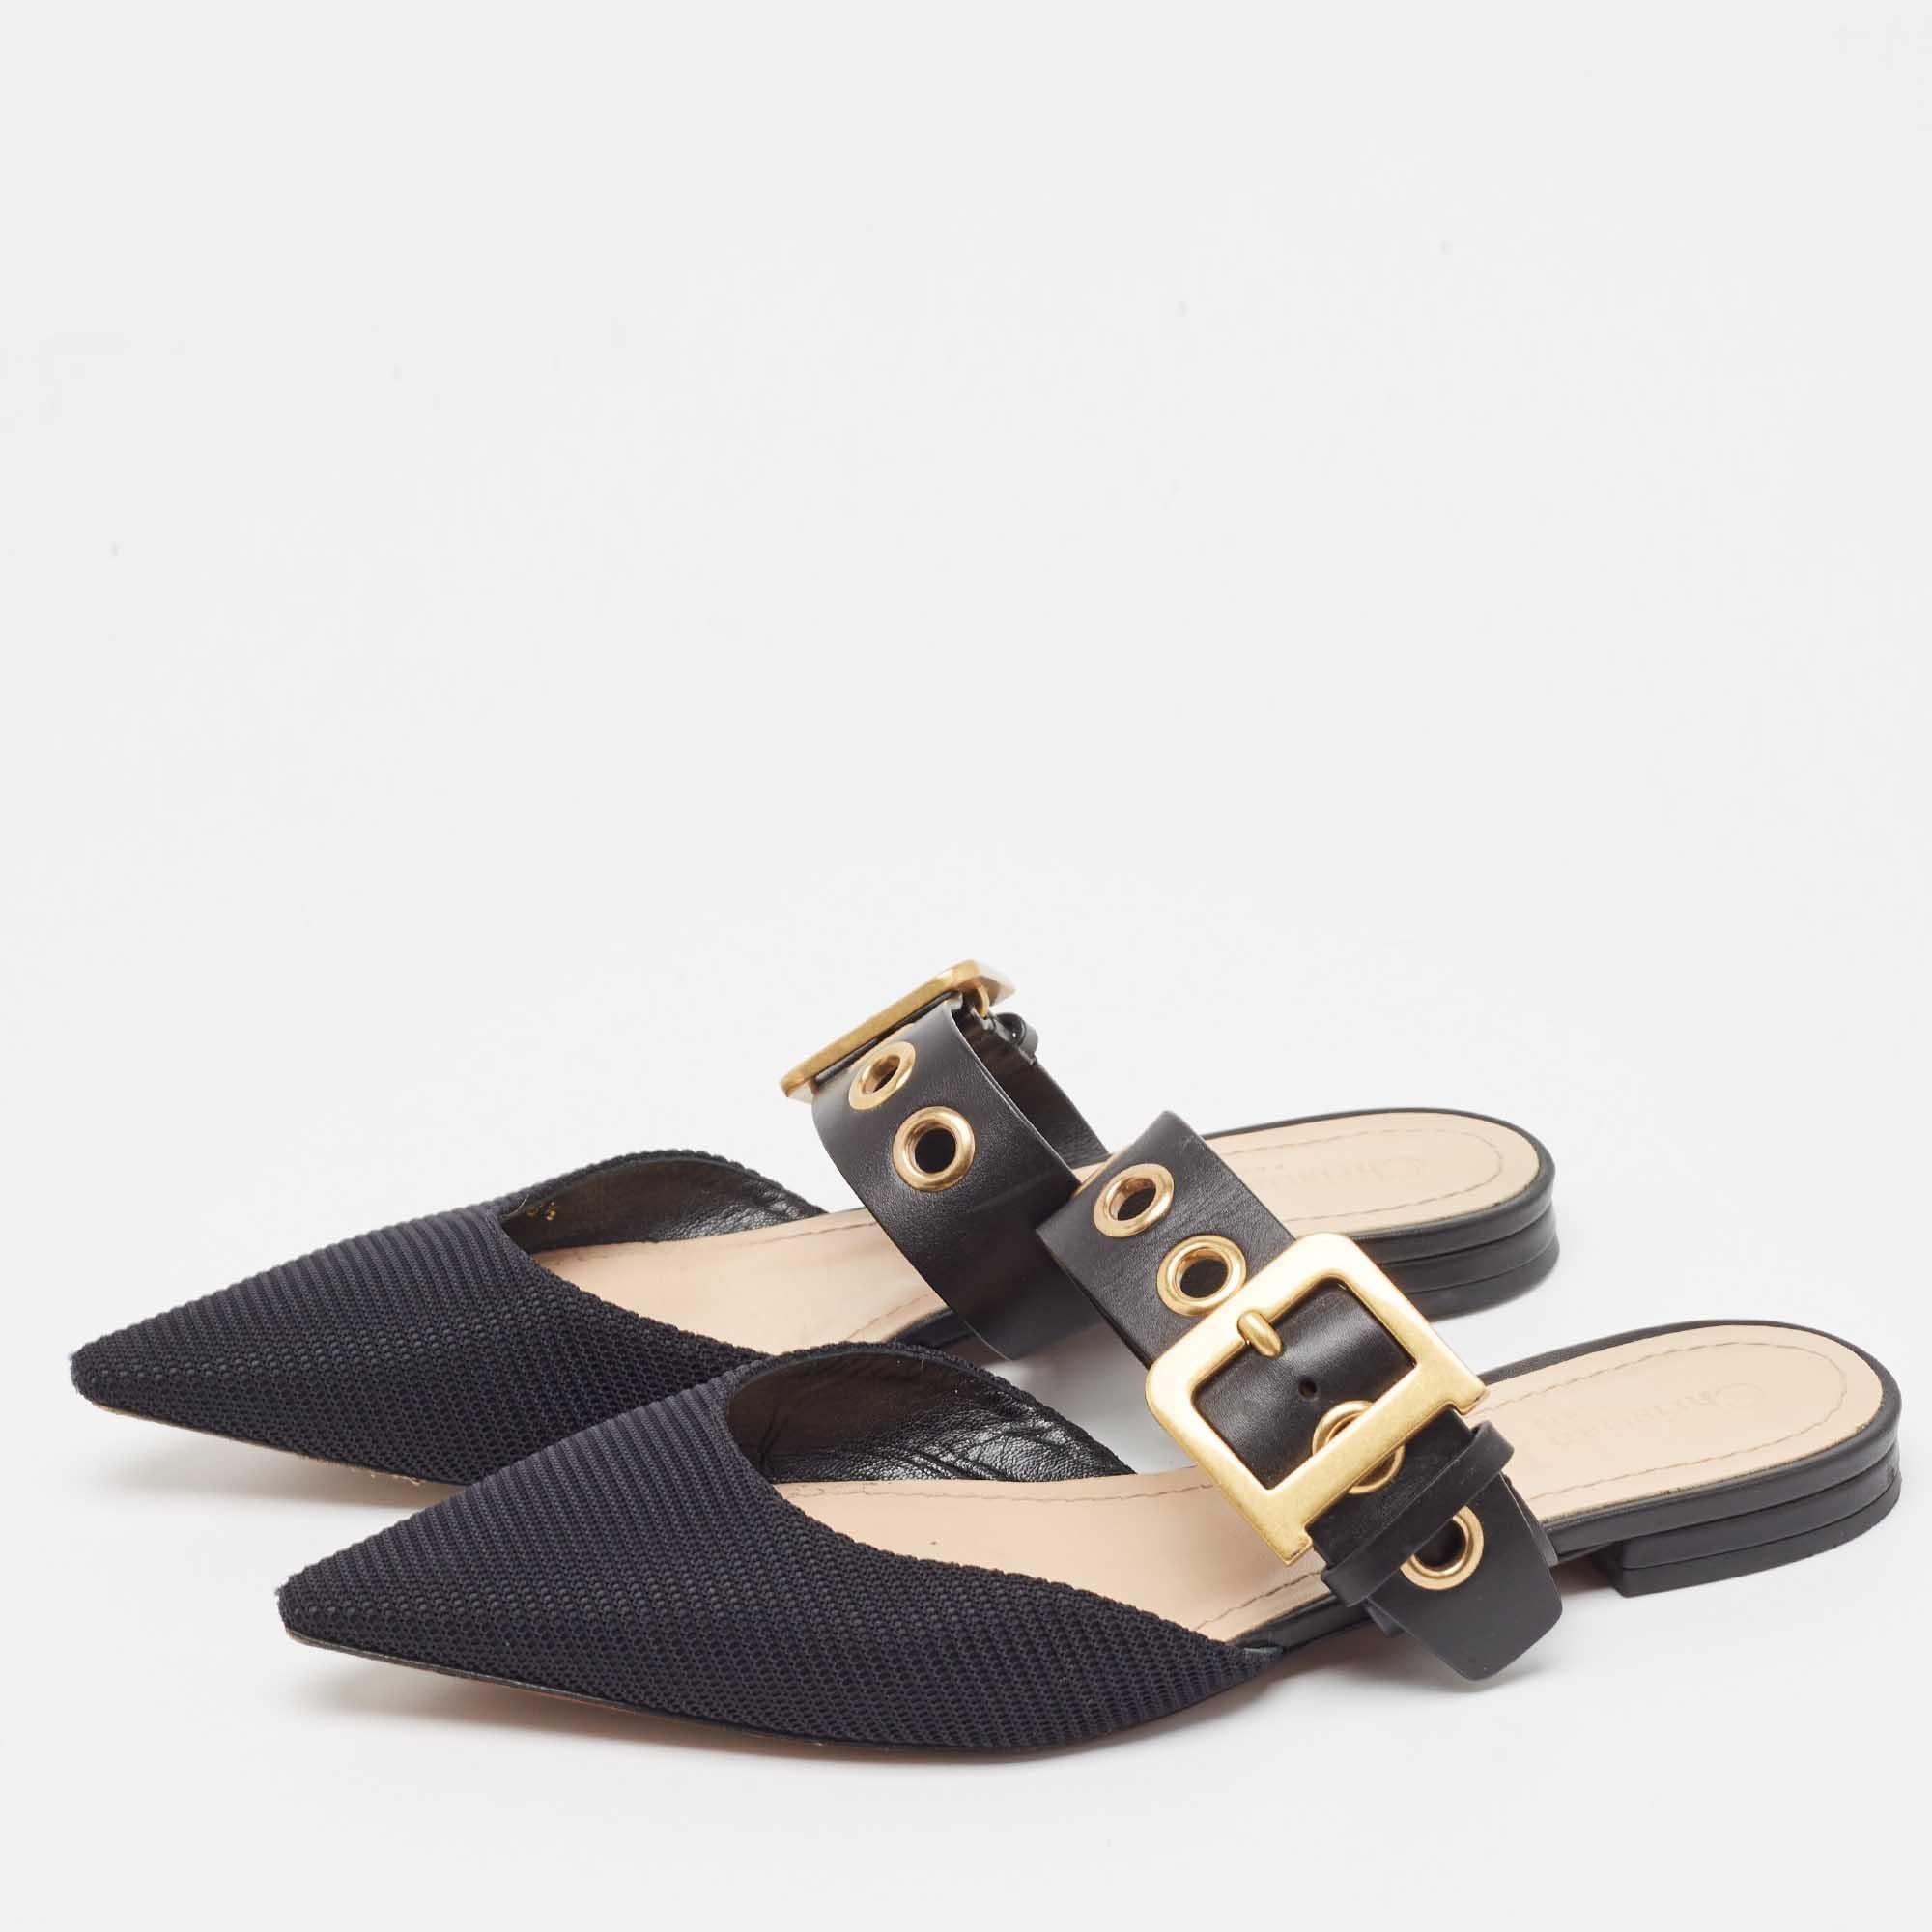 Elevate your look without compromising on comfort when you slip into these Dior mules. Made from canvas & leather, the mules are perfect for any occasion and will leave you feeling confident each time you slip them on.

